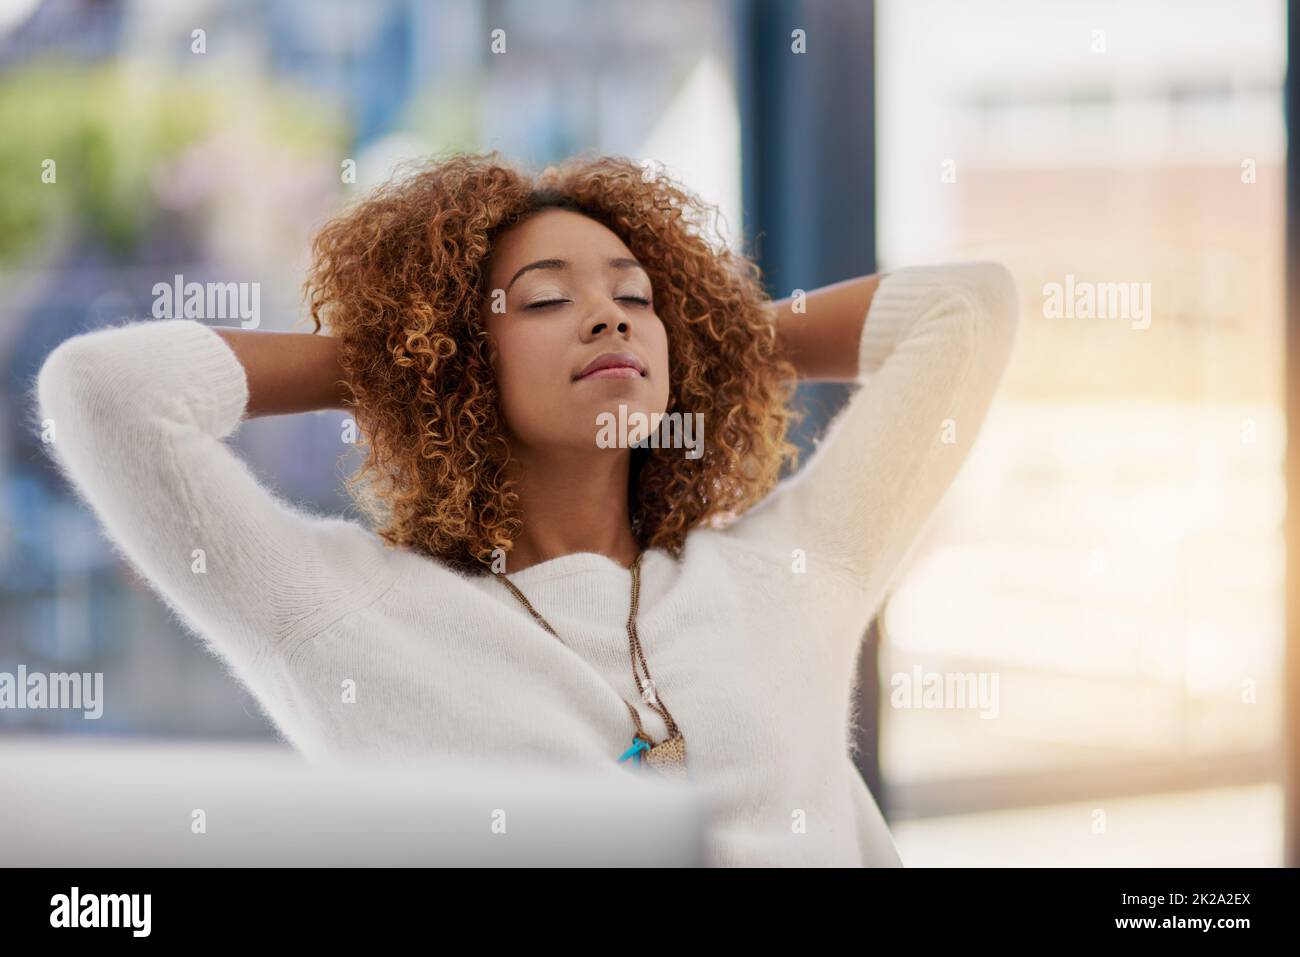 Contemplating the road to success. Shot of a young entrepreneur leaning back in her chair with her hands behind her head. Stock Photo